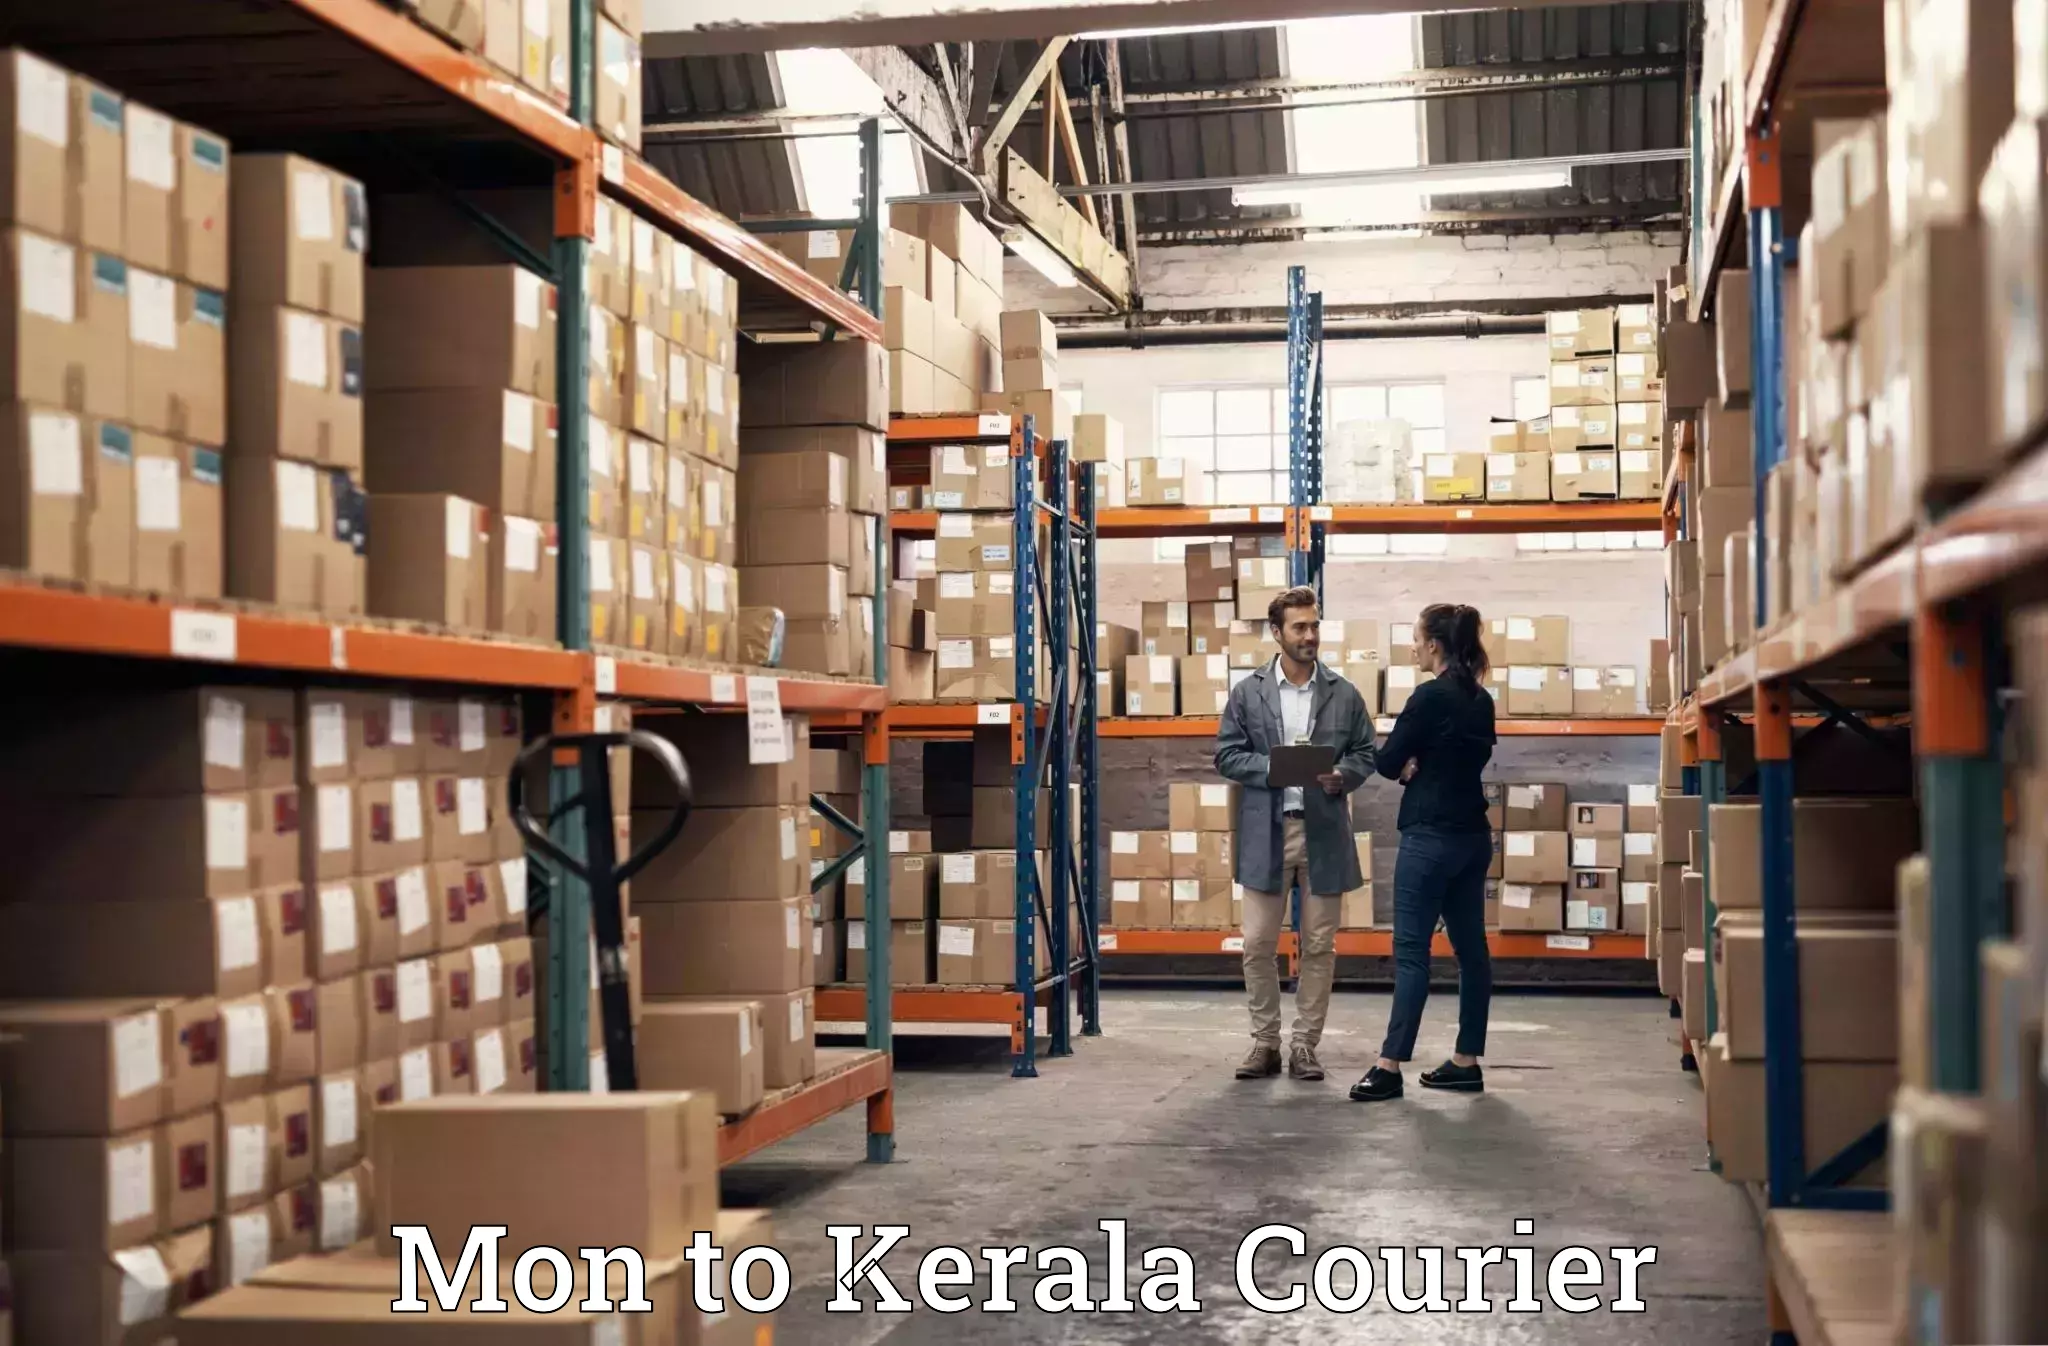 Reliable relocation services Mon to Kerala